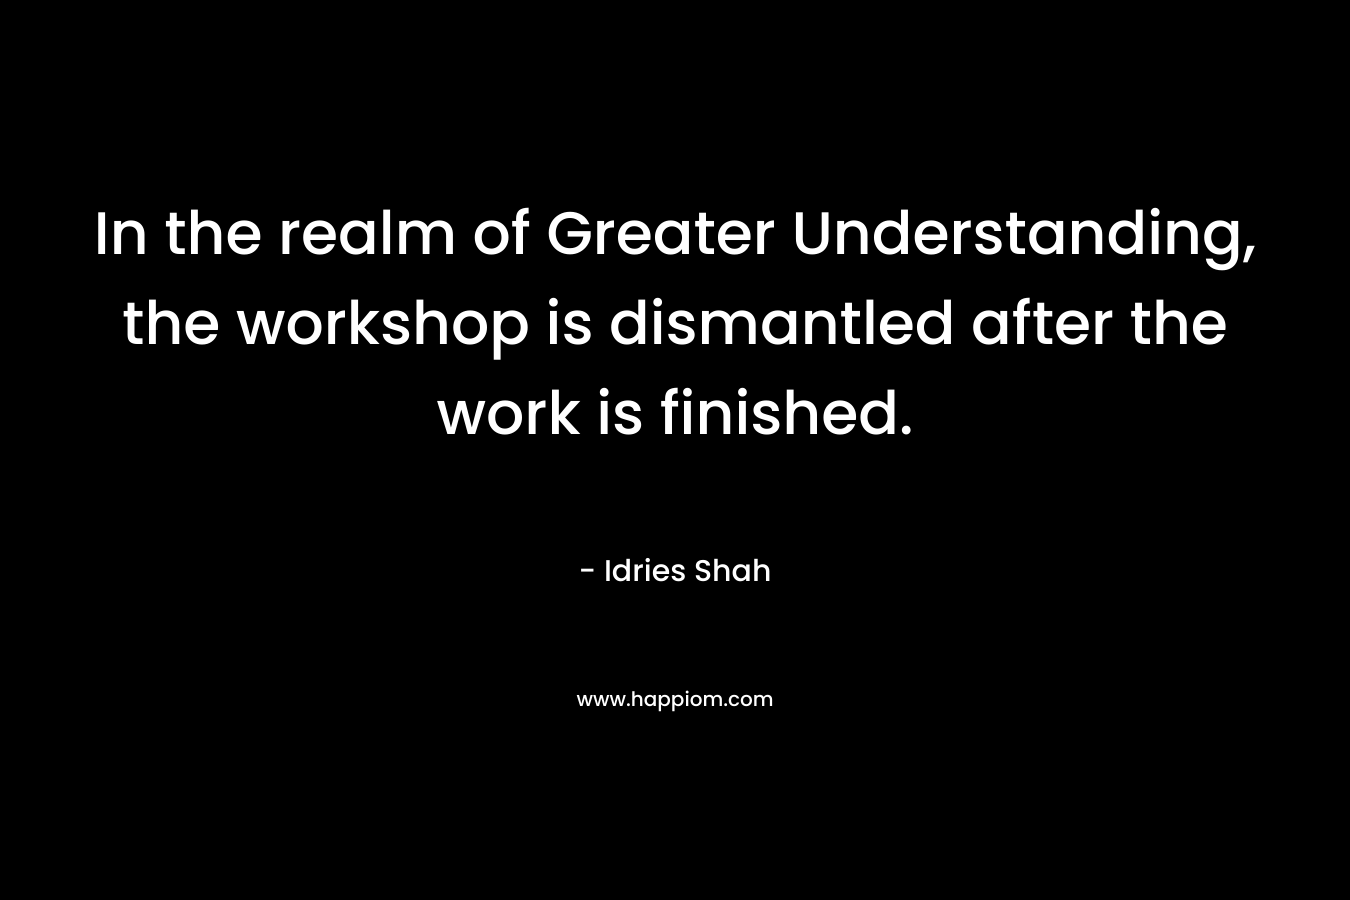 In the realm of Greater Understanding, the workshop is dismantled after the work is finished. – Idries Shah